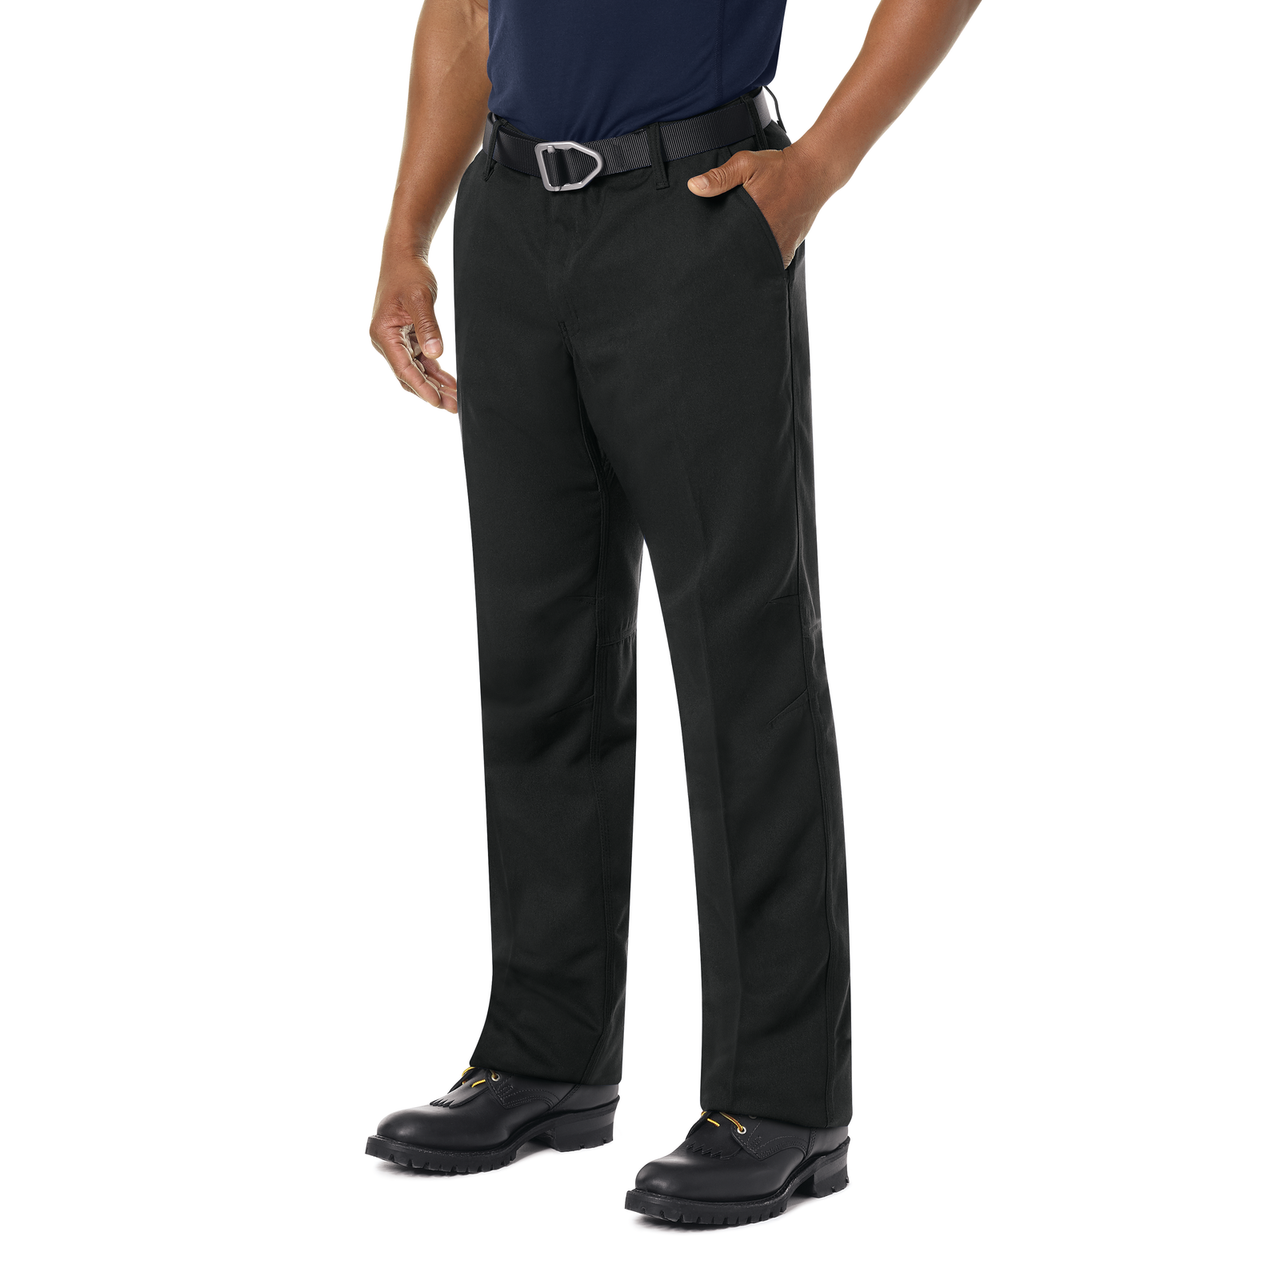 Workrite FR Pants Wildland Dual-Compliant Uniform (FP30) | The Fire Center | Fuego Fire Center | Store | FIREFIGHTER GEAR | FREE SHIPPING | Uncompromising FR protection meets dual-compliant performance. Contoured waistband for added comfort. Metal shank button closure. Triple-needle felled side and seat seams offer superior durability. Articulated knees for ease of movement. 